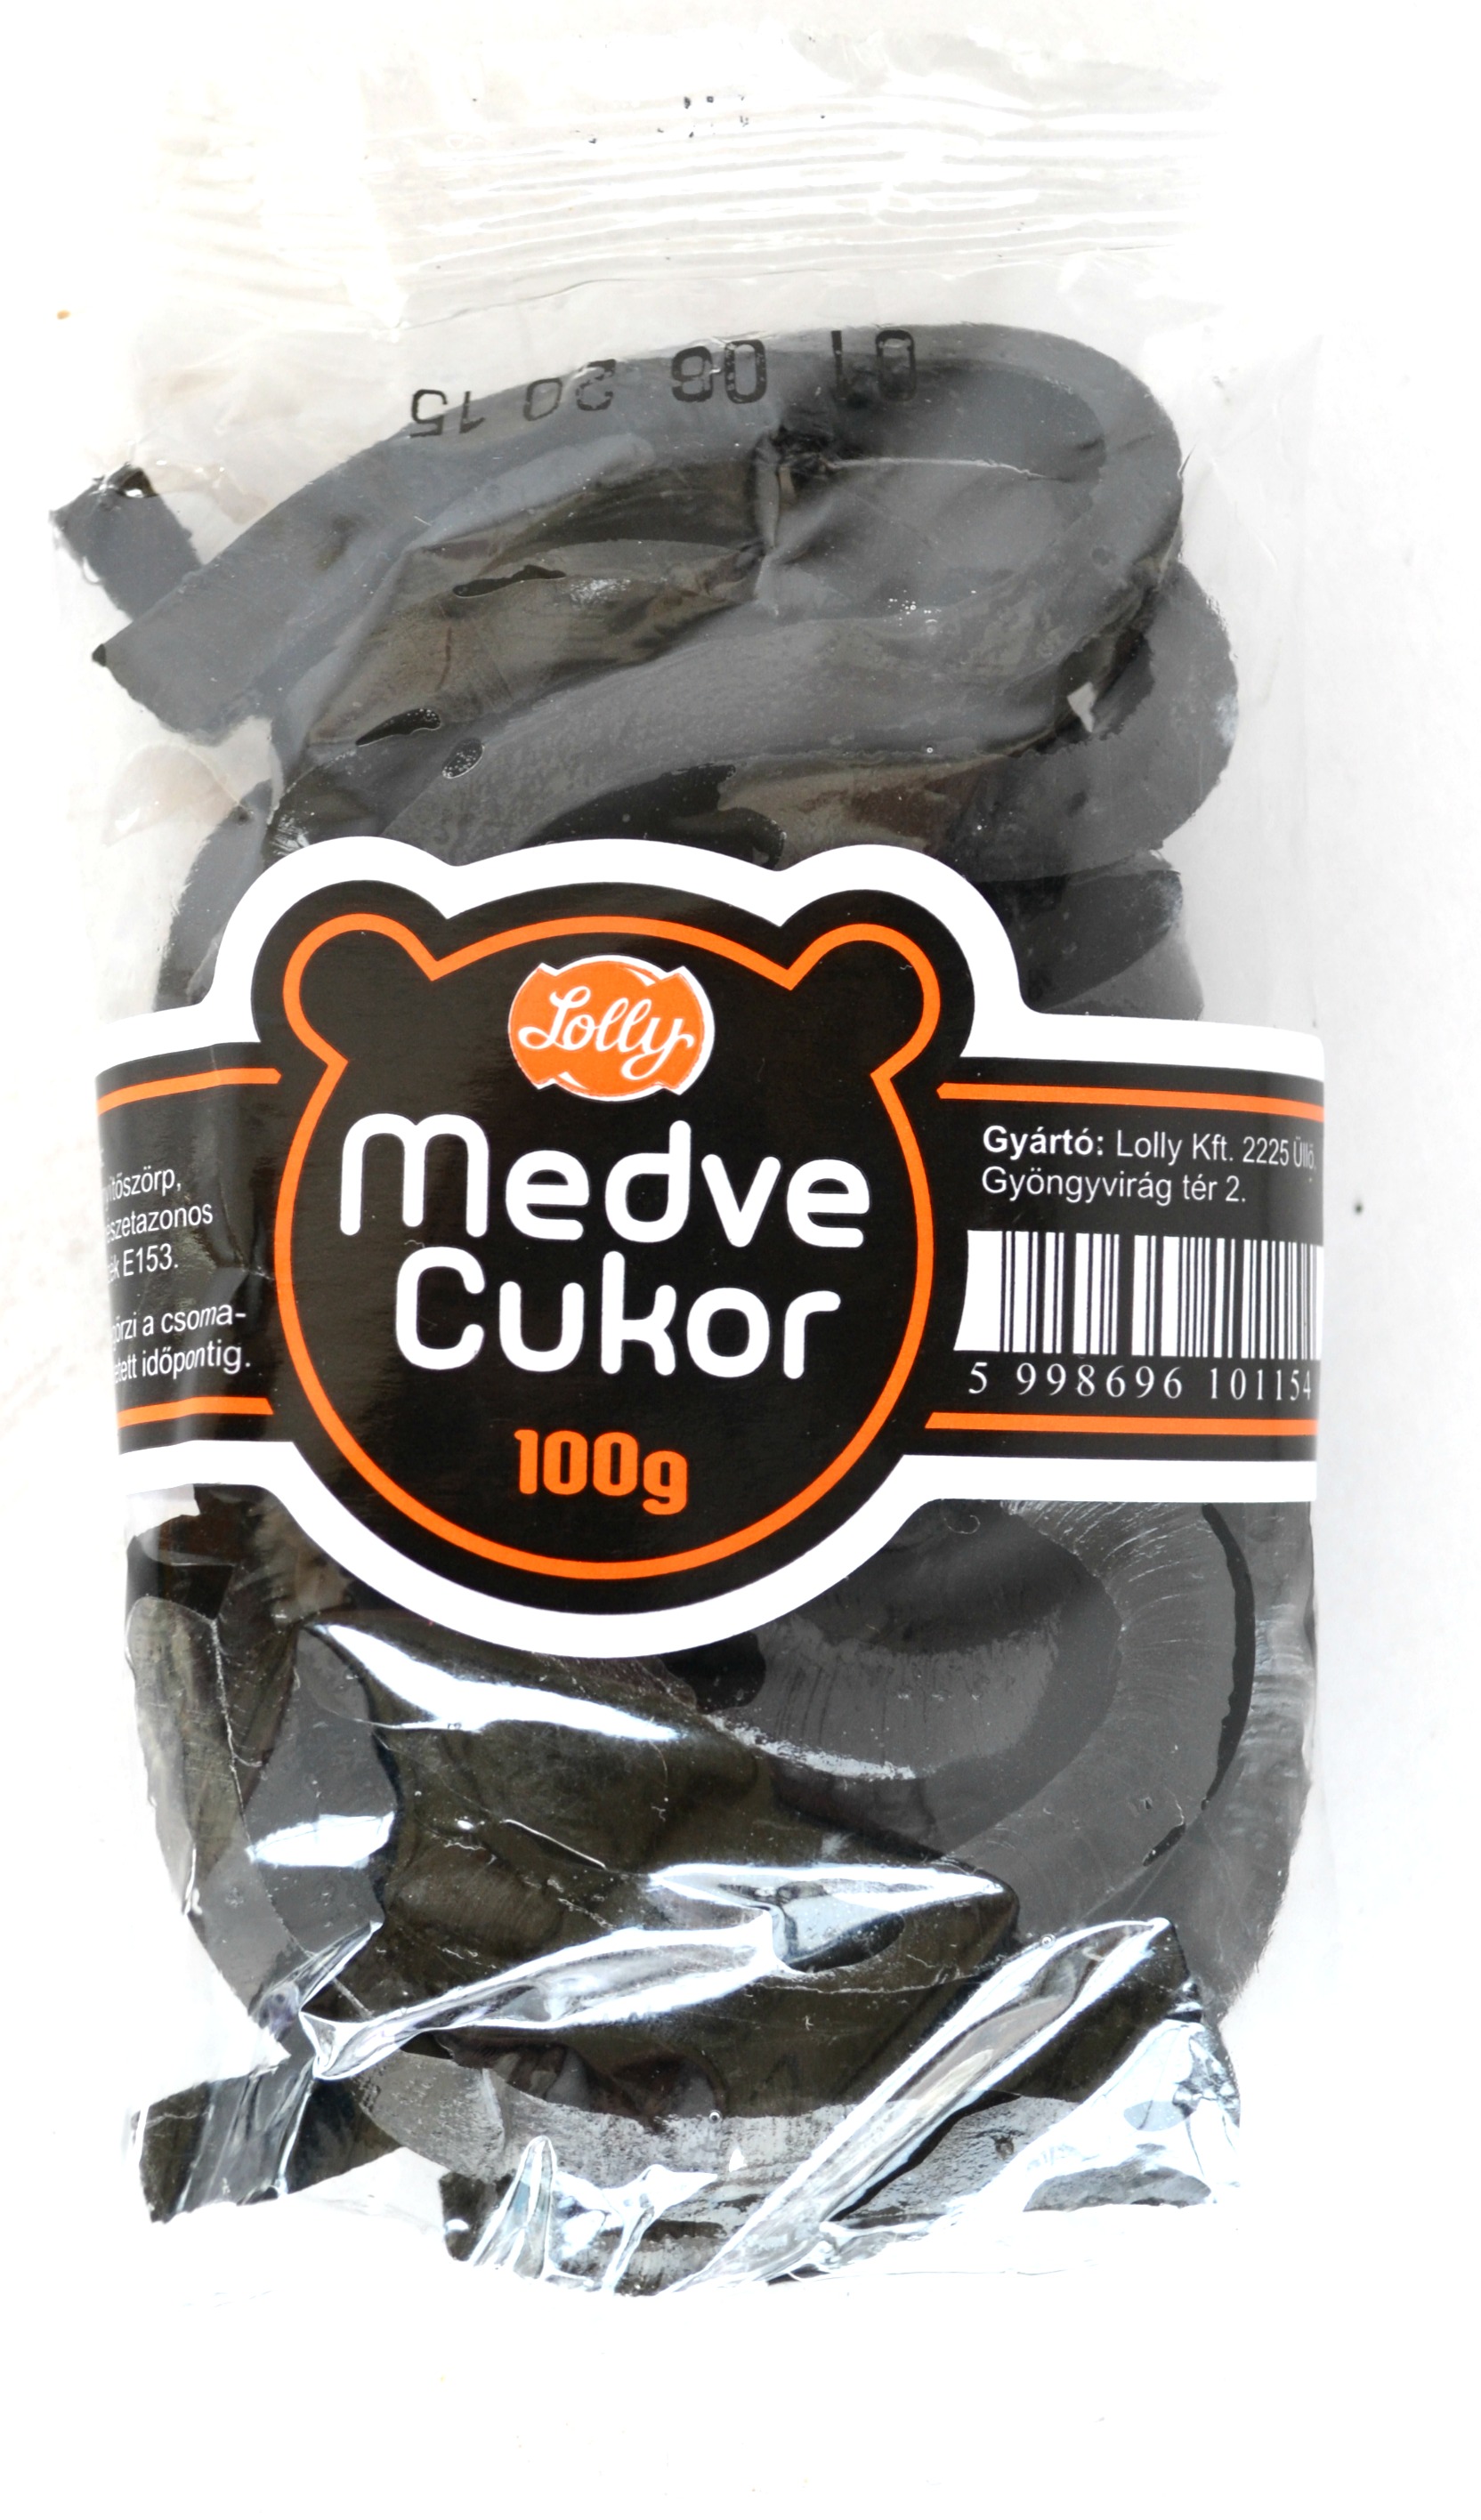 Lolly Medvecukor 80g